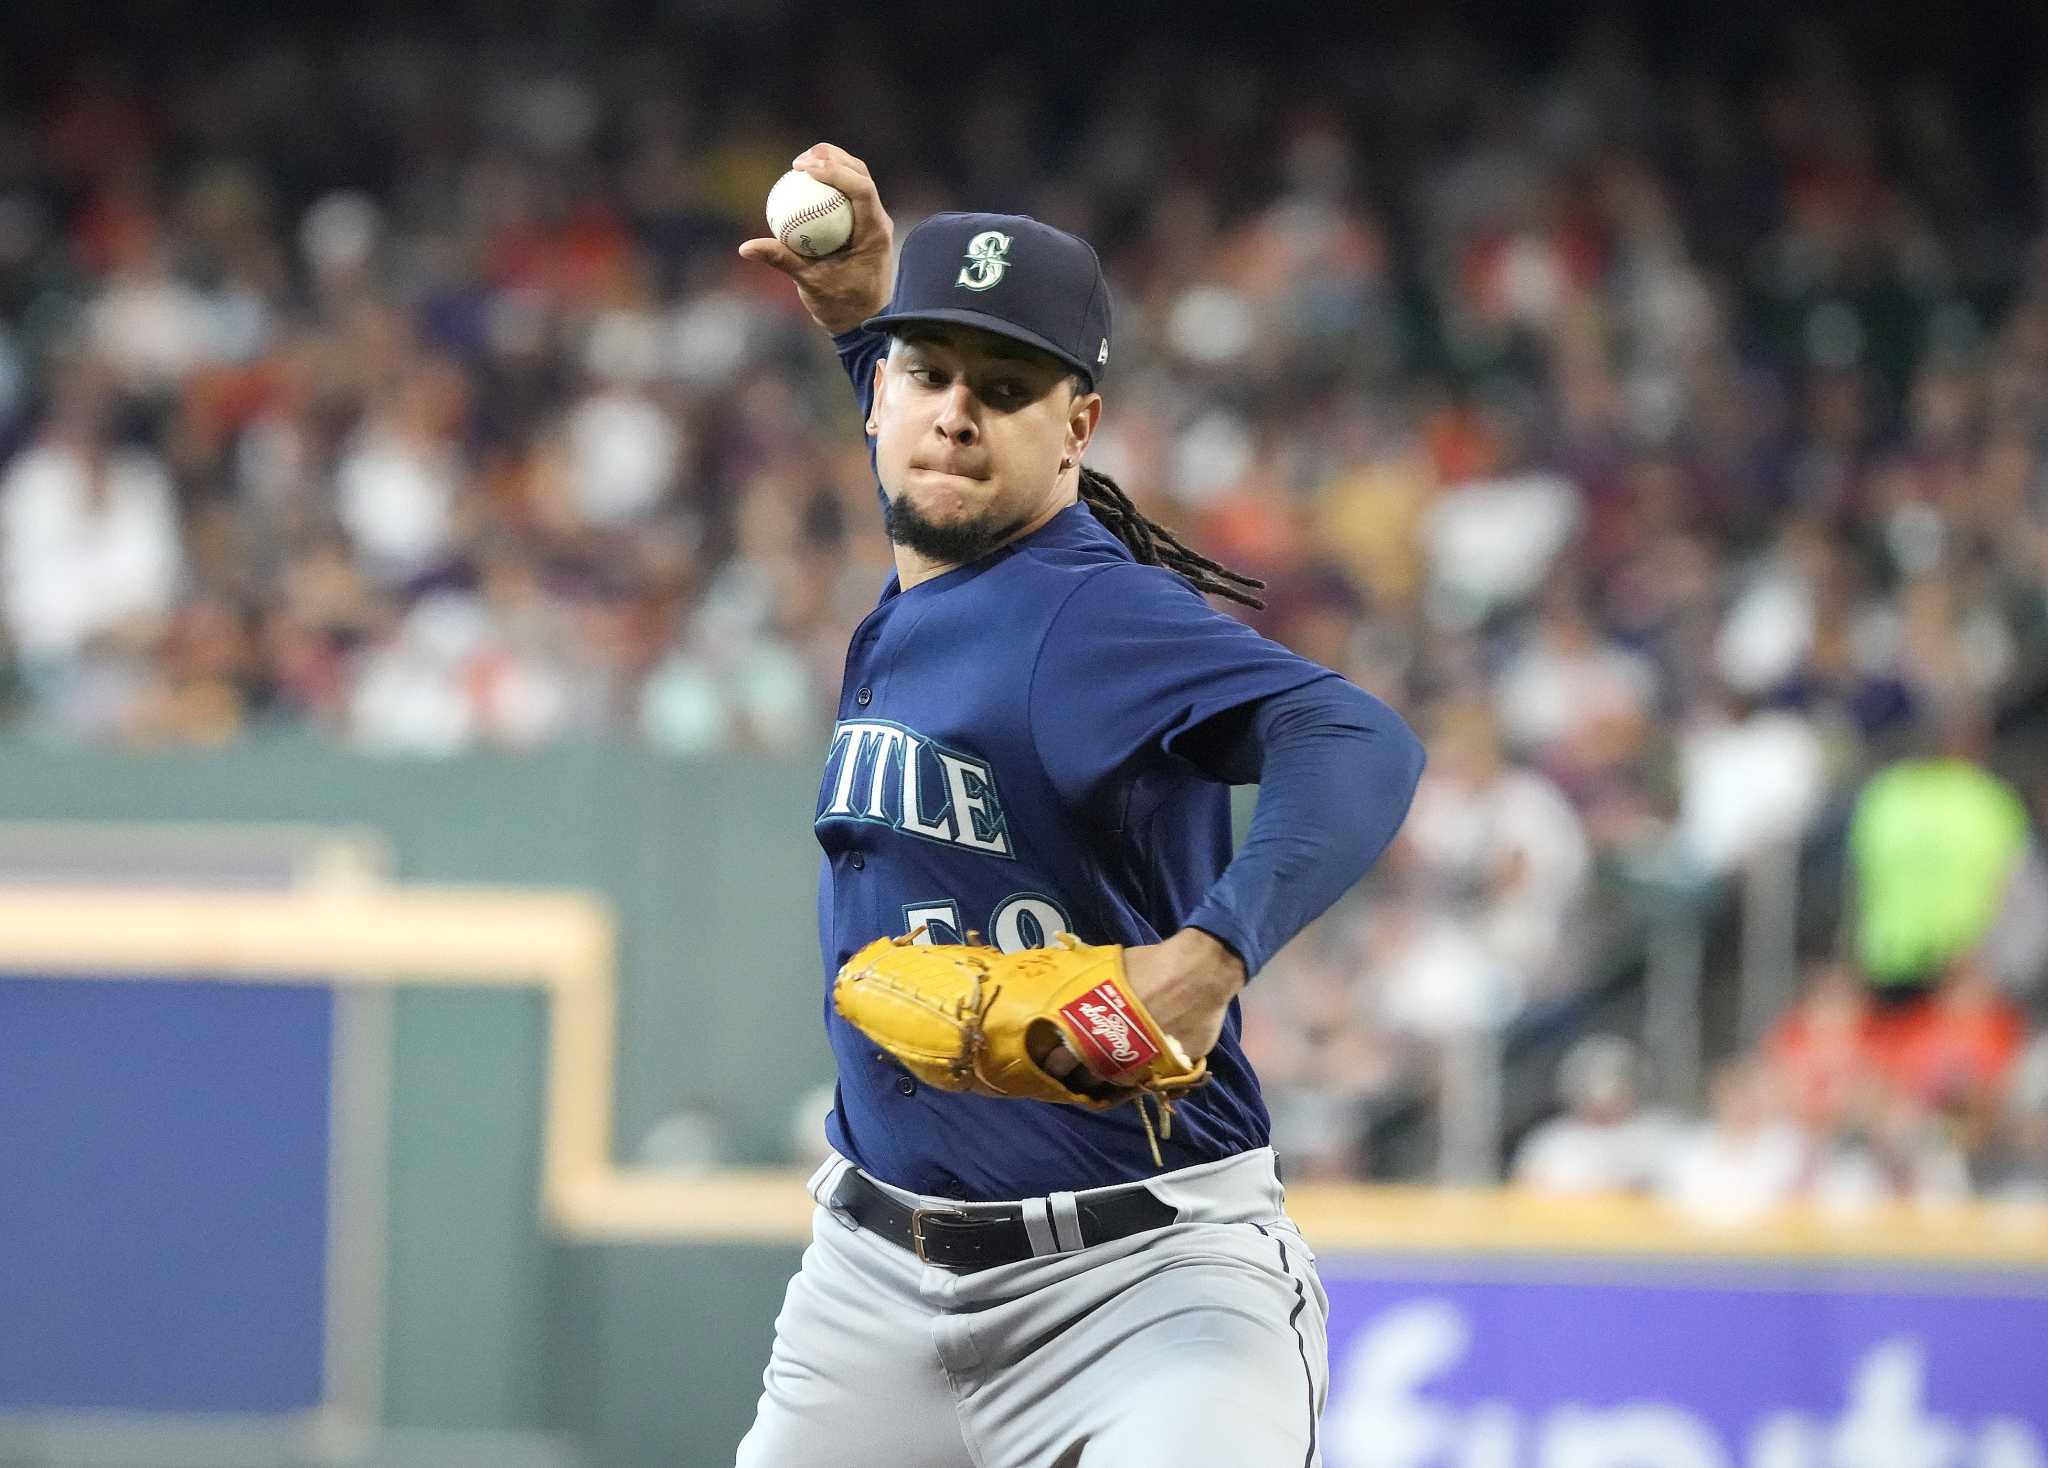 Rookie Bryce Miller pitches Mariners past Astros